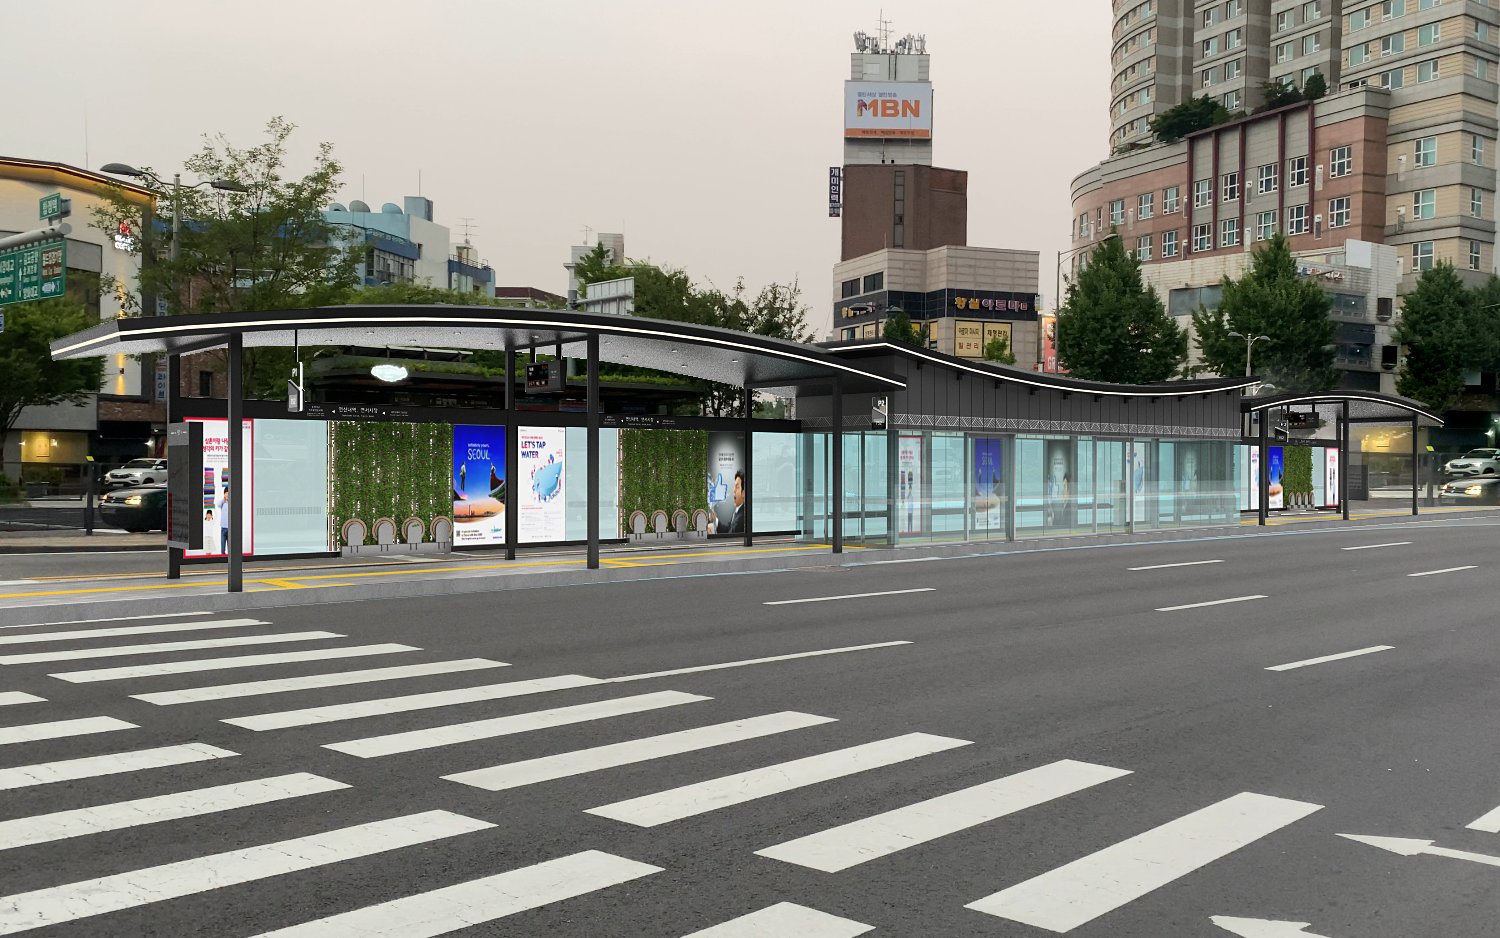 Smart Shelter, the new high-tech bus stops in #Seoul will start its trial operation at 10 bus stops #IseoulU